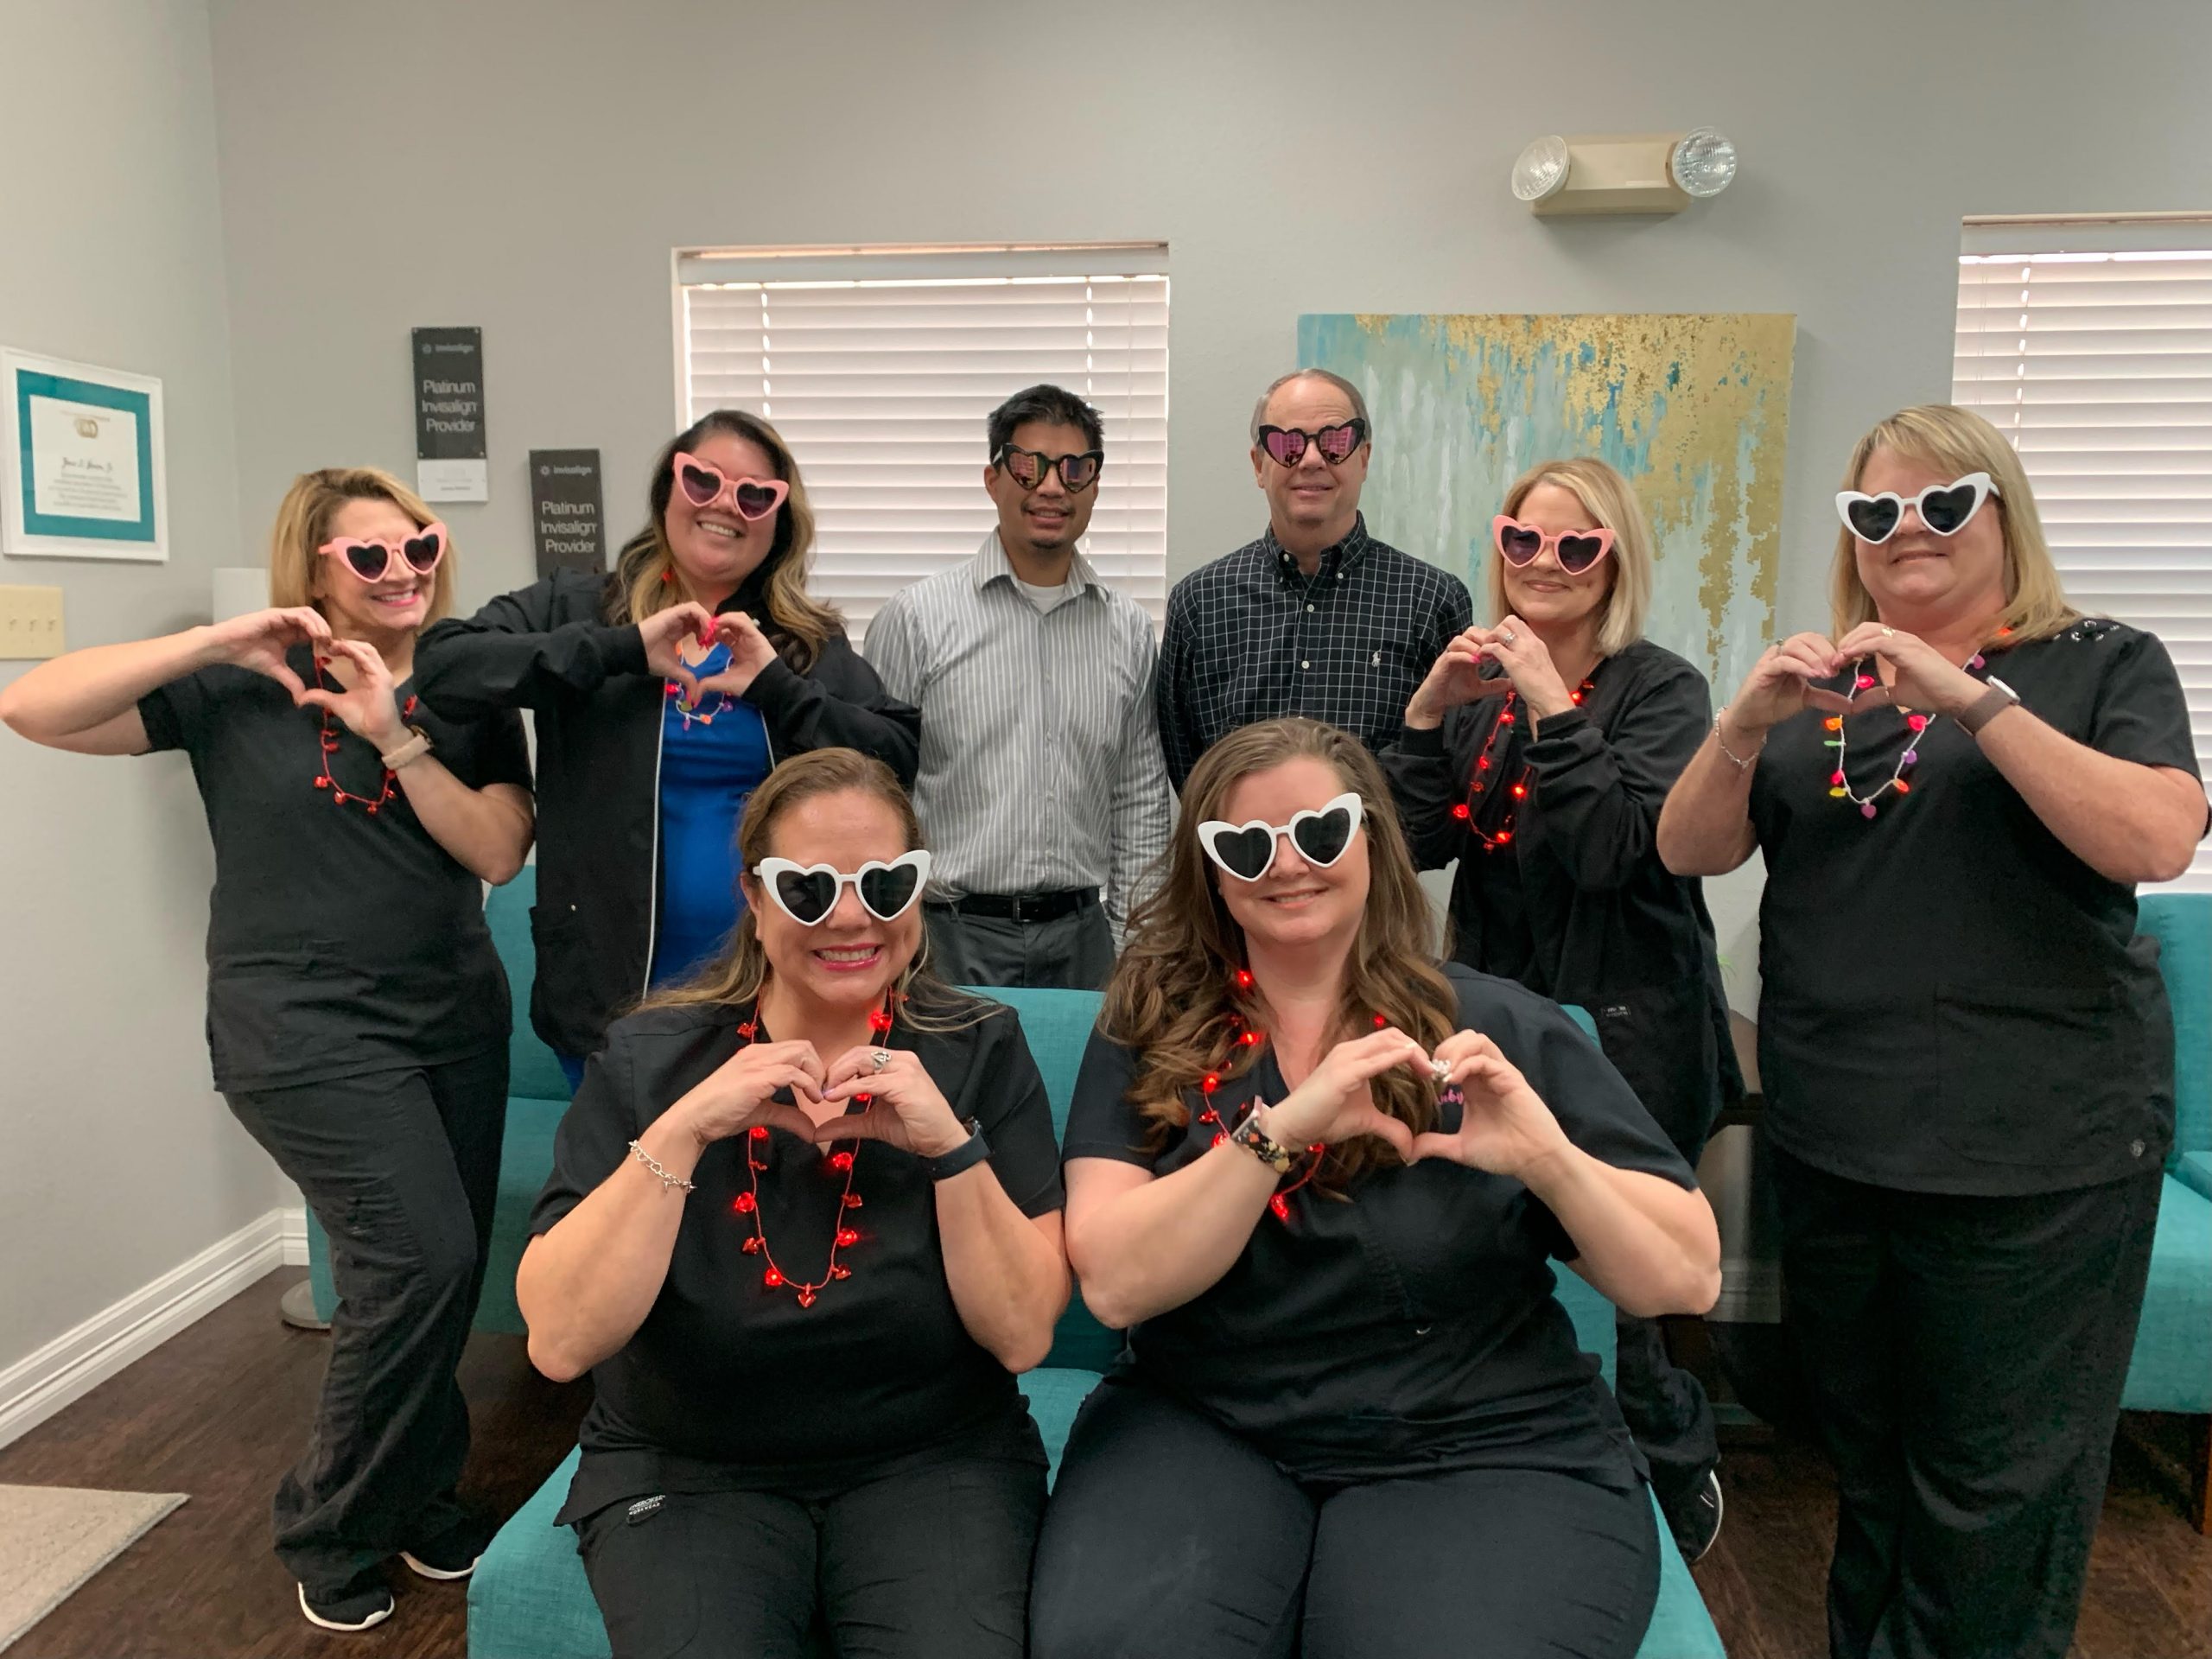 Dr. James Henson of Henson Orthodontics in Lake Jackson, TX has offered braces and Invisalign in Brazoria County for over 30 years. With an office in Angleton and Lake Jackson, and ongoing specials and finance options too.